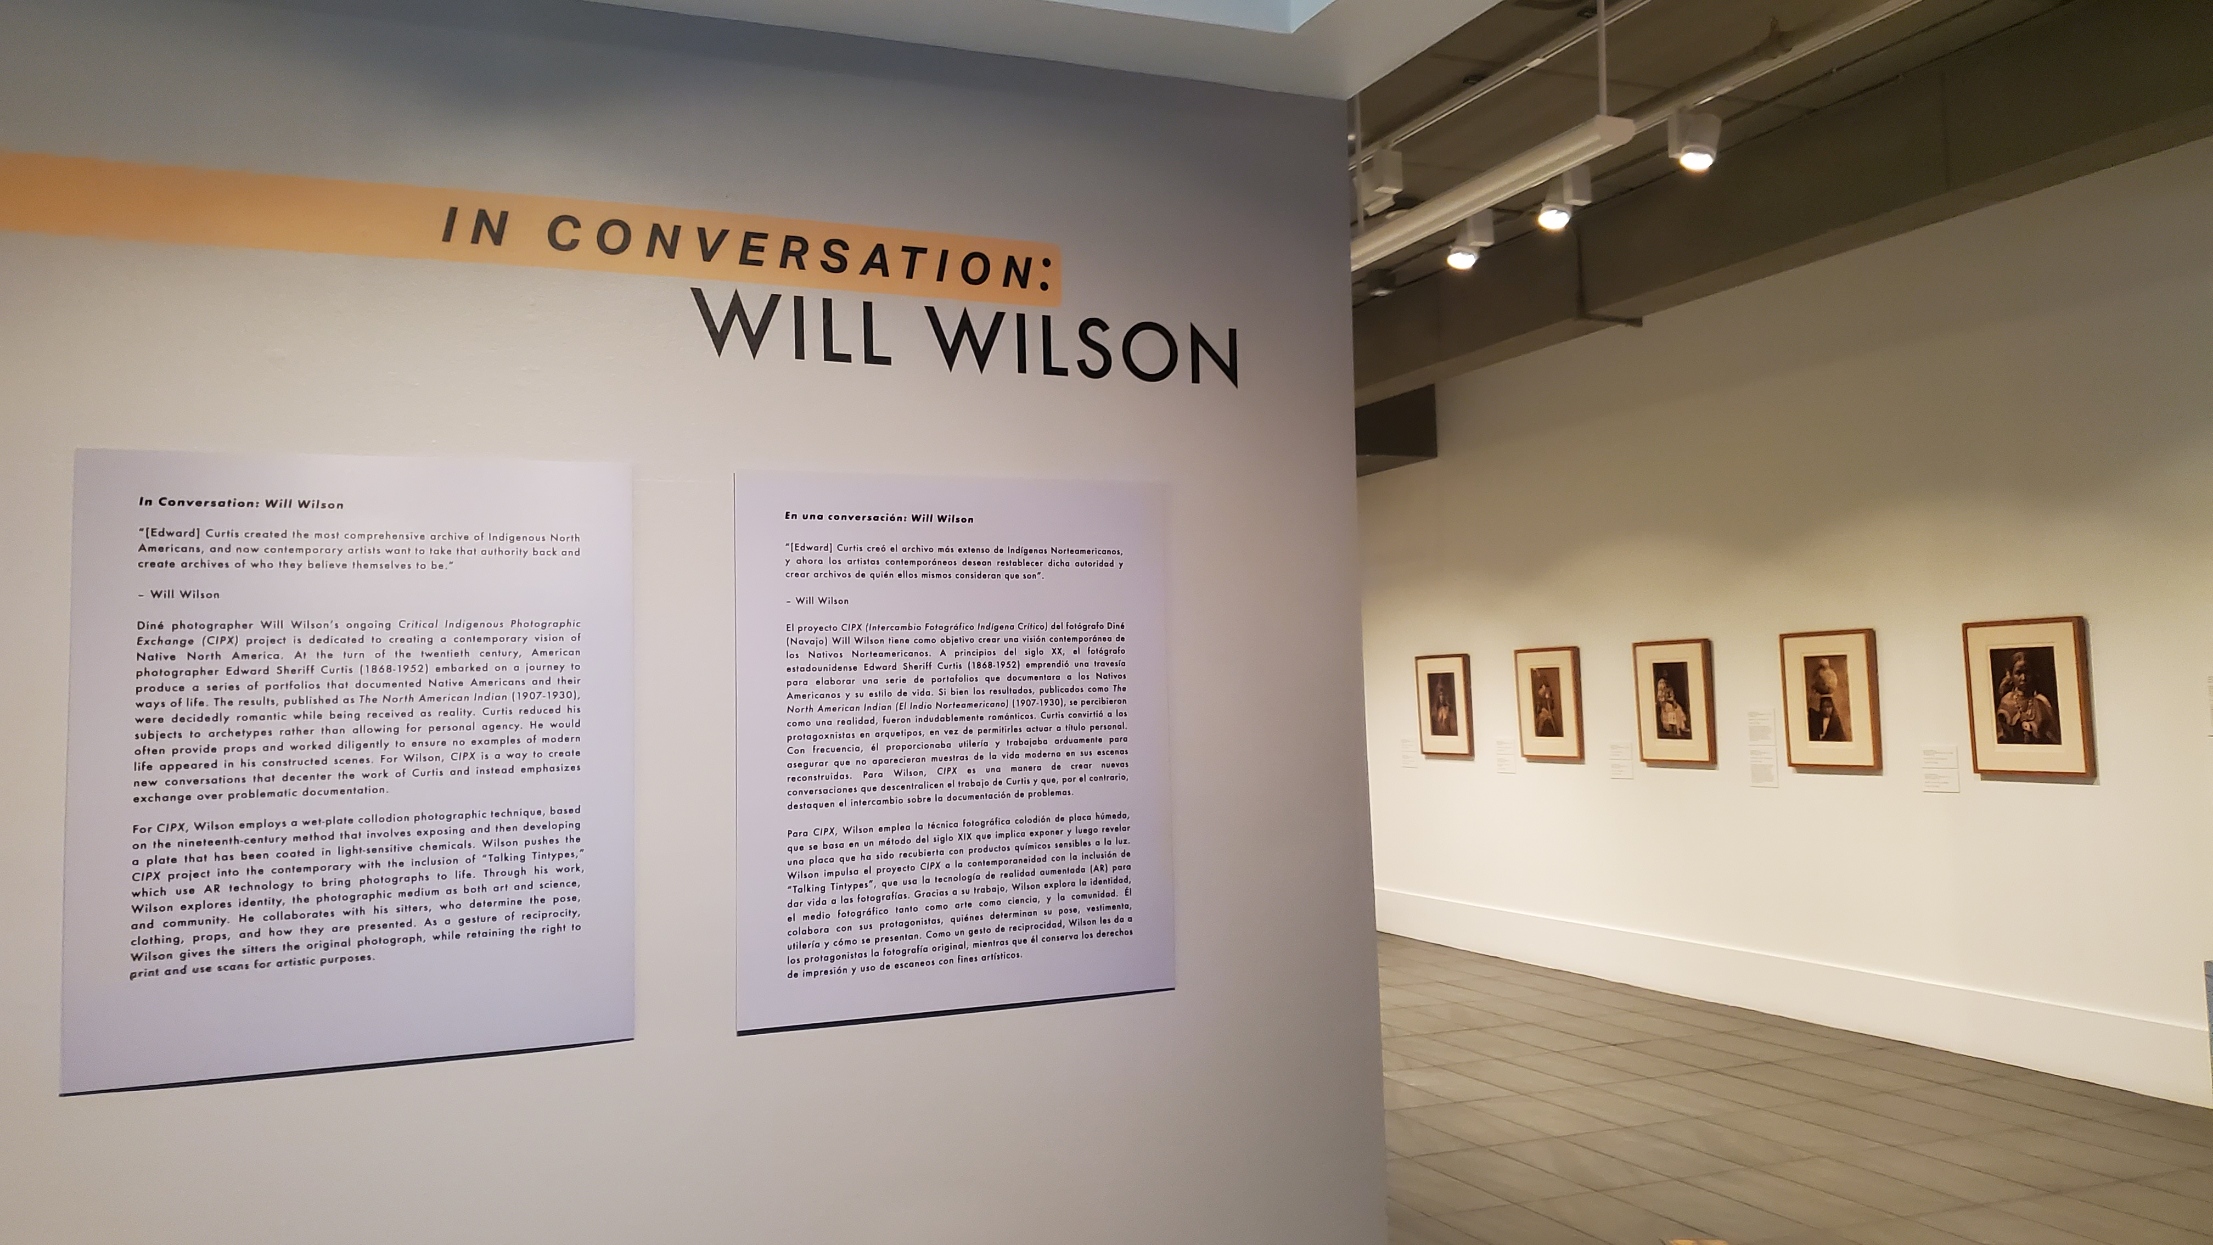 View of a museum interior showing the opening wall for the exhibition "In Conversation: Will Wilson," with two text panels side by side. Just beyond, five sepia-toned photographs are visible on an adjacent wall.